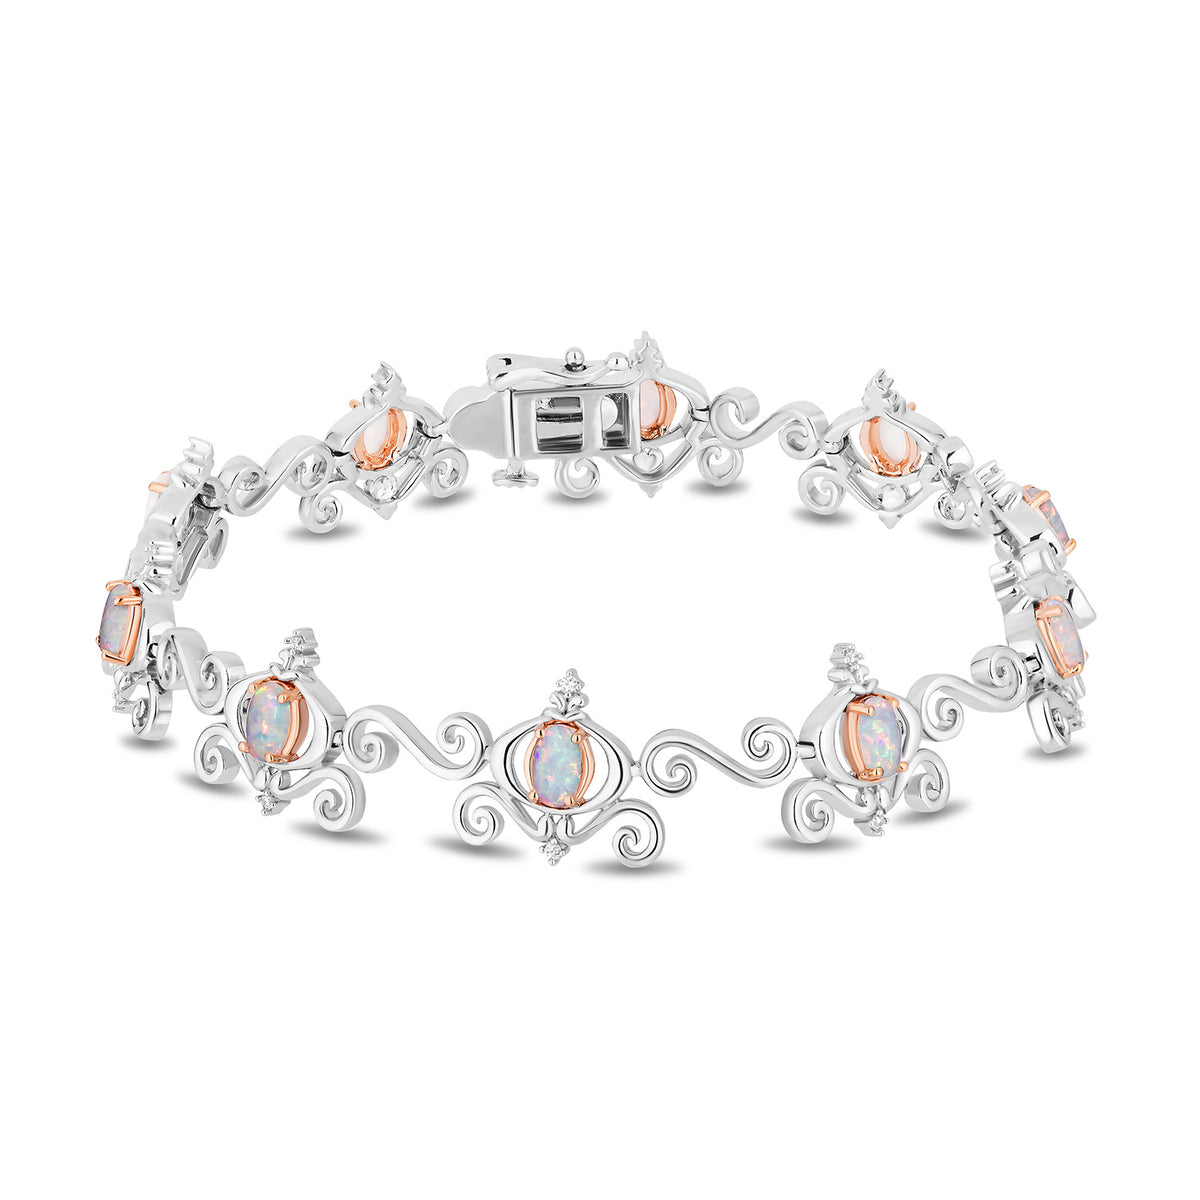 Enchanted Disney Fine Jewelry Sterling Silver and 10K Rose Gold with 1